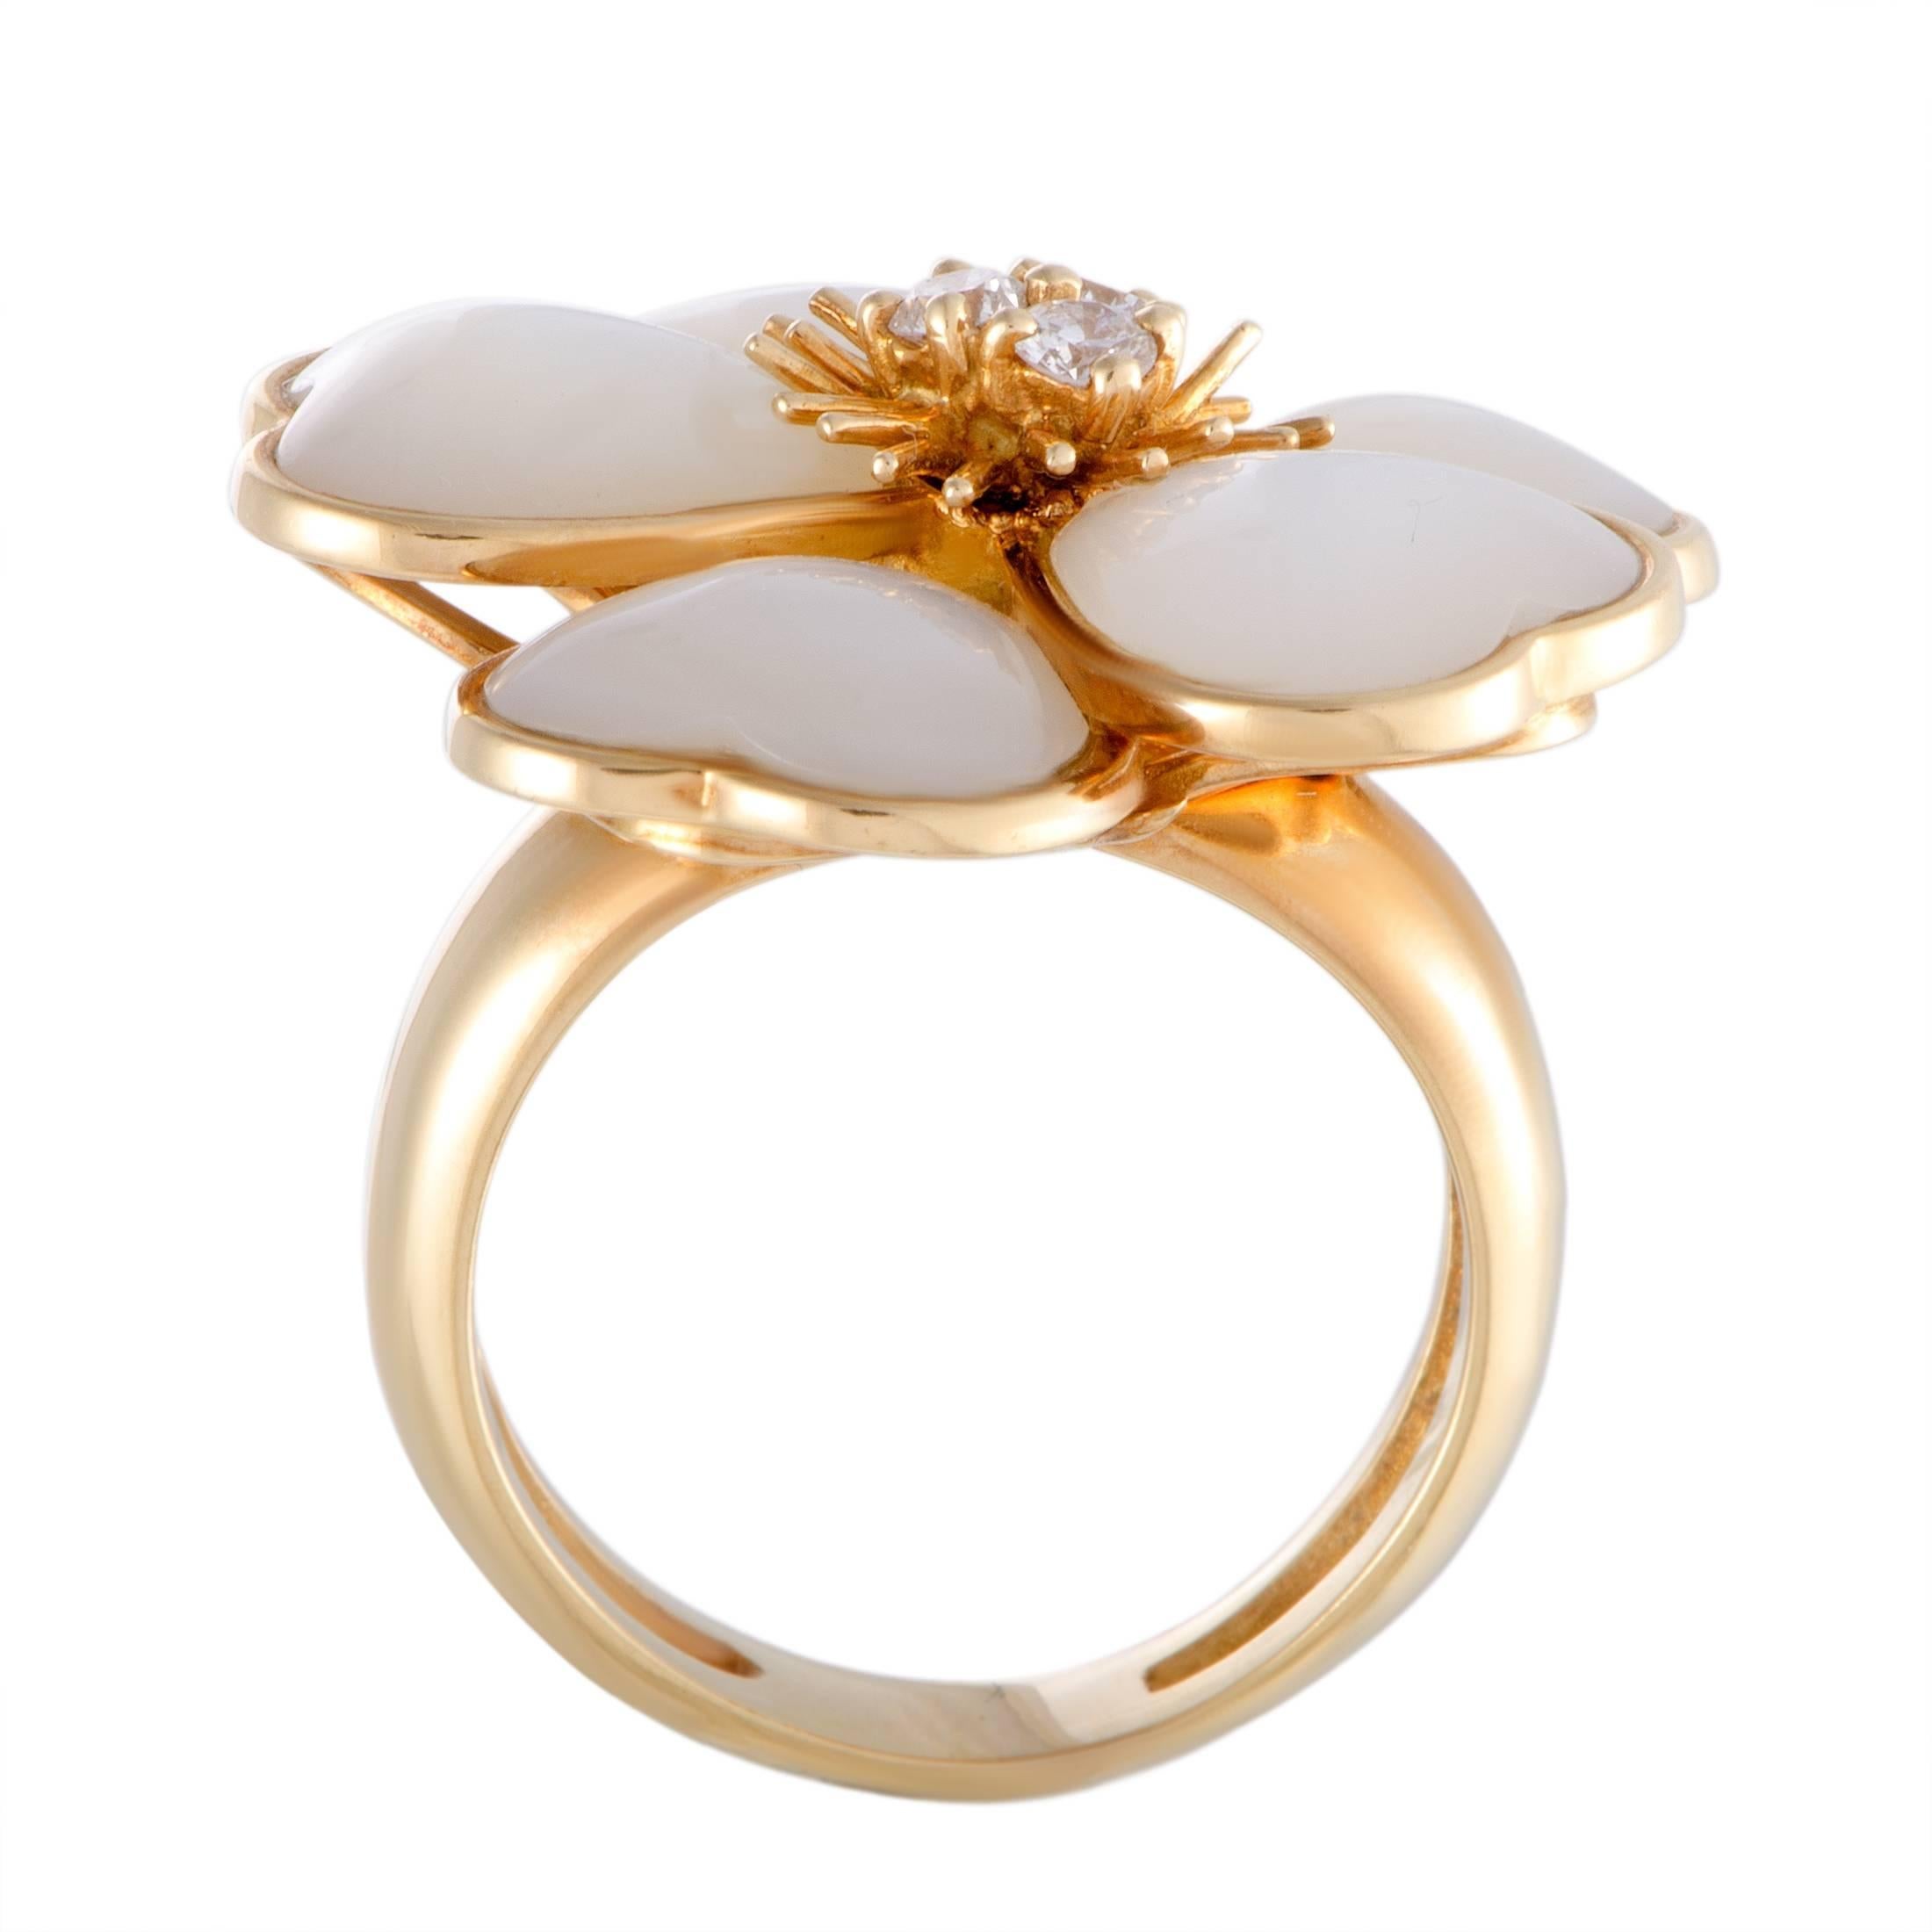 Depicting a lovely flower in an exceptionally graceful manner, this gorgeous Van Cleef & Arpels ring compels with its nifty feminine design and stylish décor. The ring is crafted from luxurious 18K yellow gold and embellished with sublime